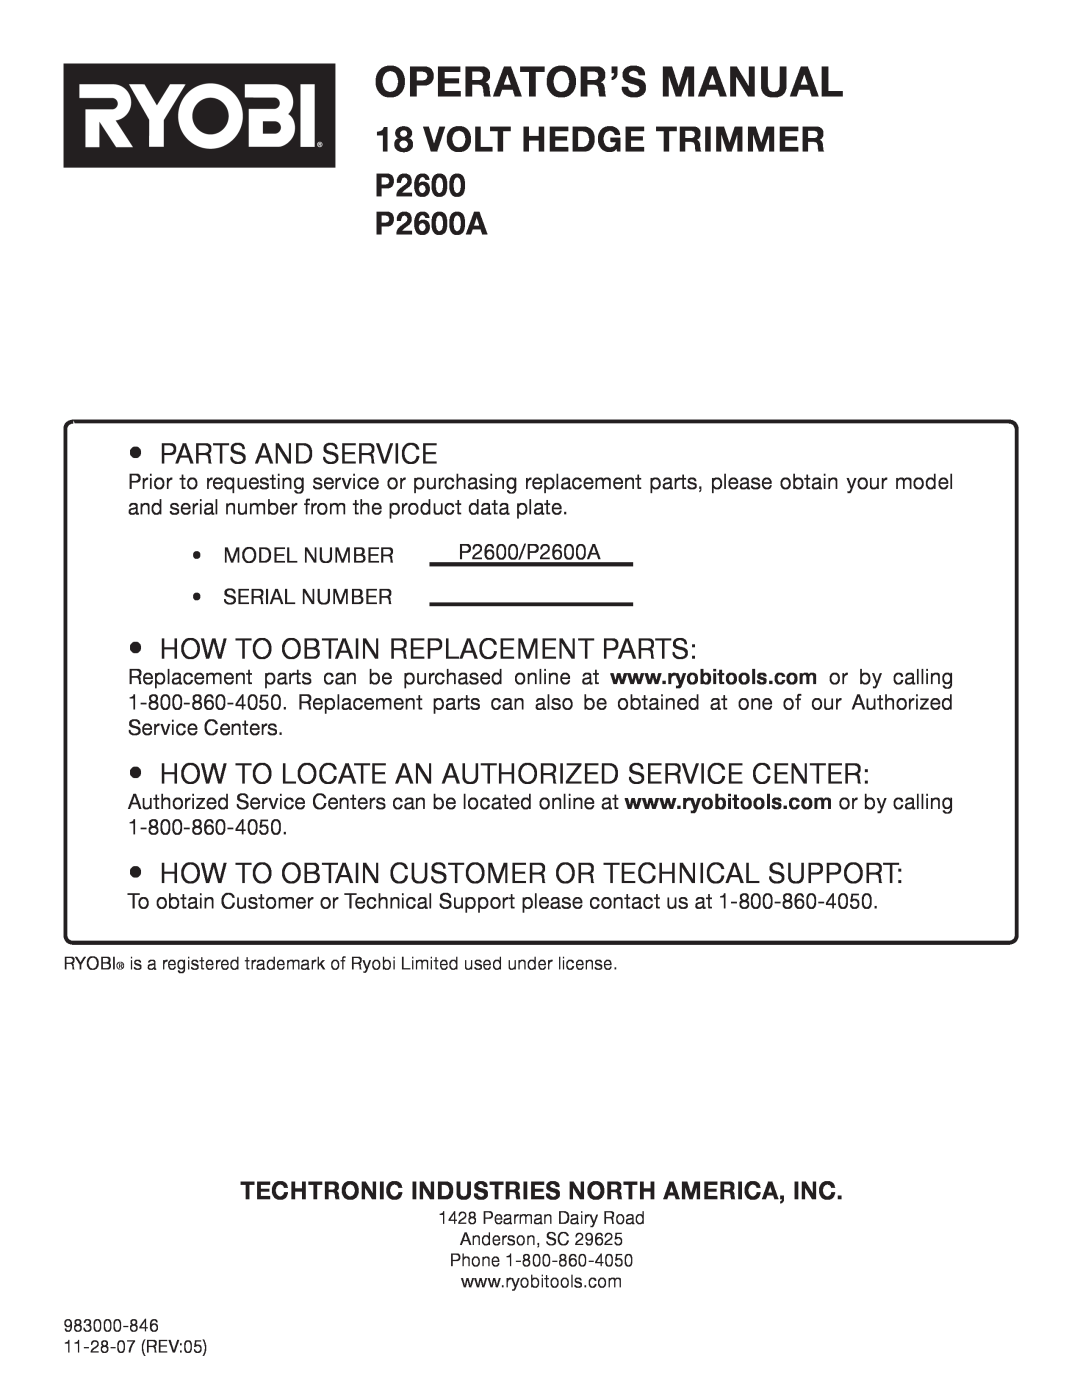 Ryobi Techtronic Industries North America, Inc, Operator’S Manual, volt HEDGE TRIMMER, p2600 P2600A, Parts and Service 